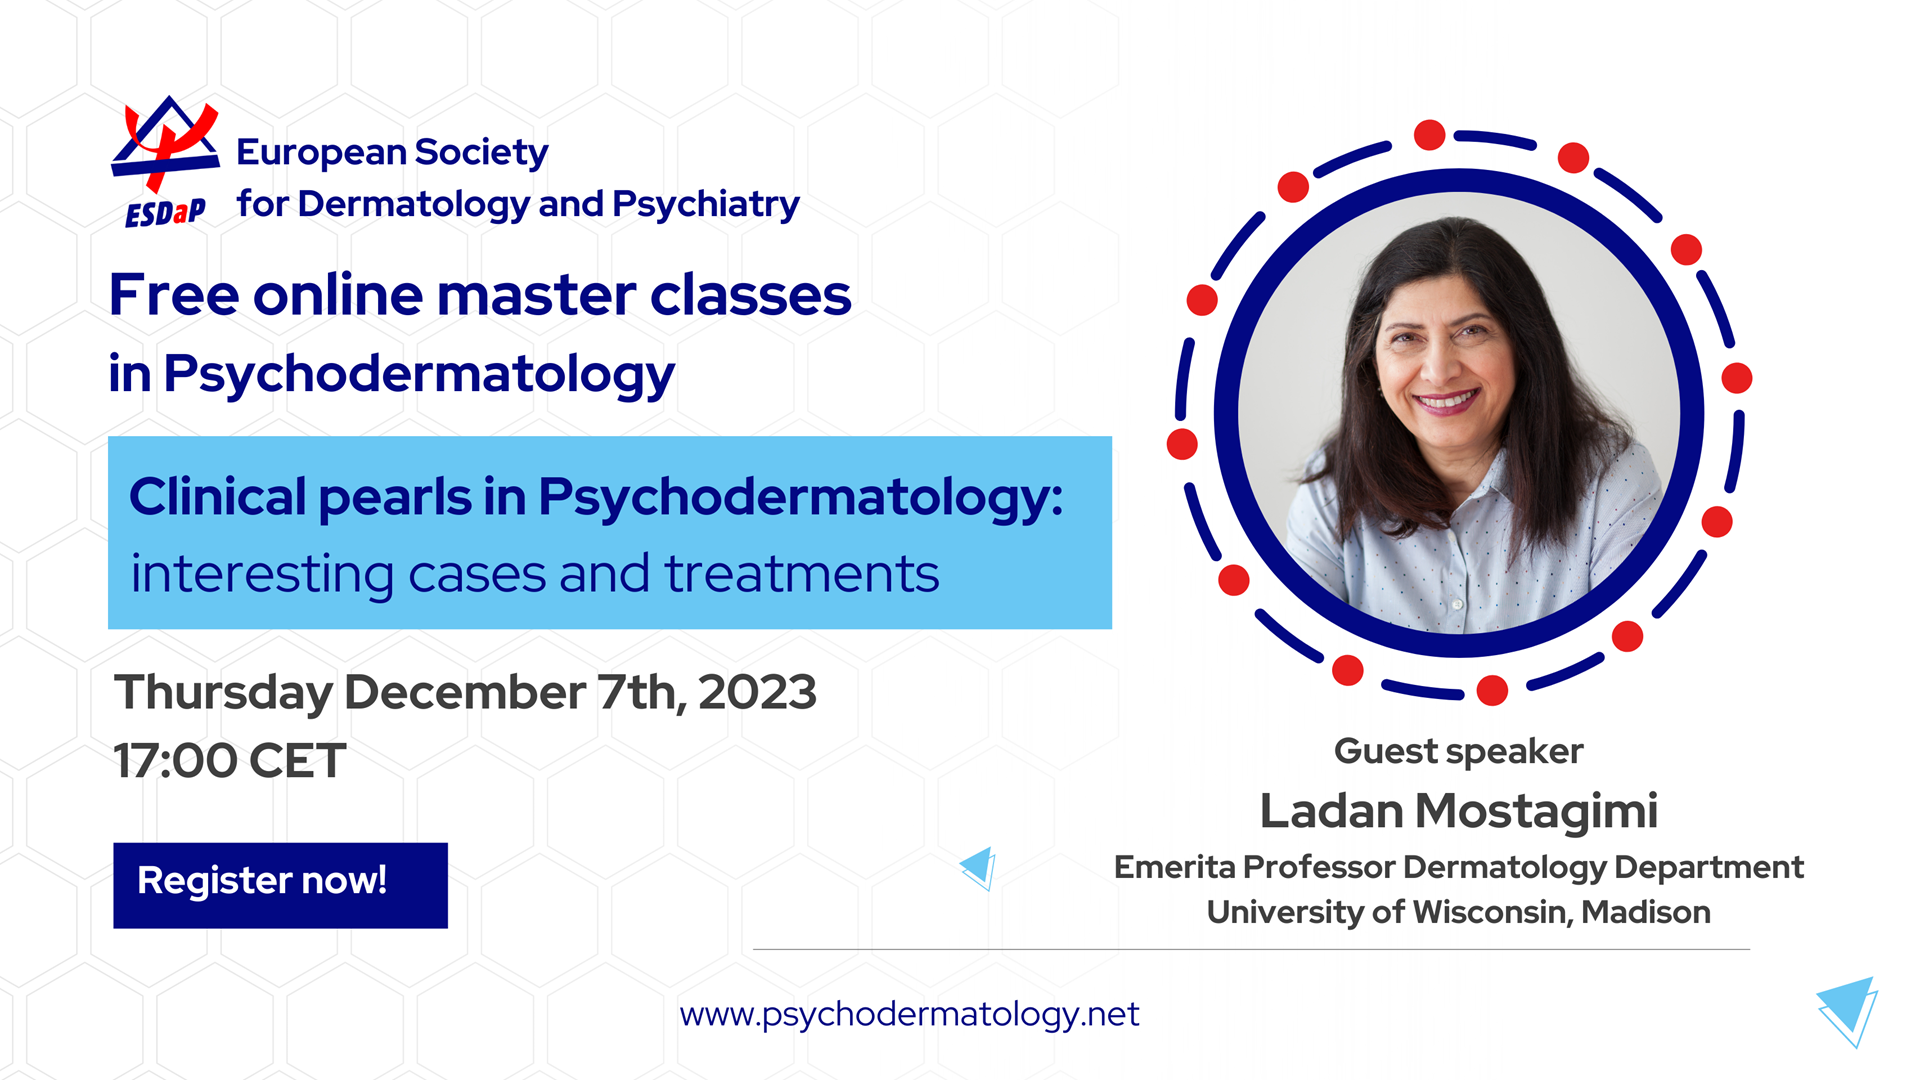 Clinical pearls in psychodermatology. Free Masterclass. 7th December 2023, 17:00 CET.